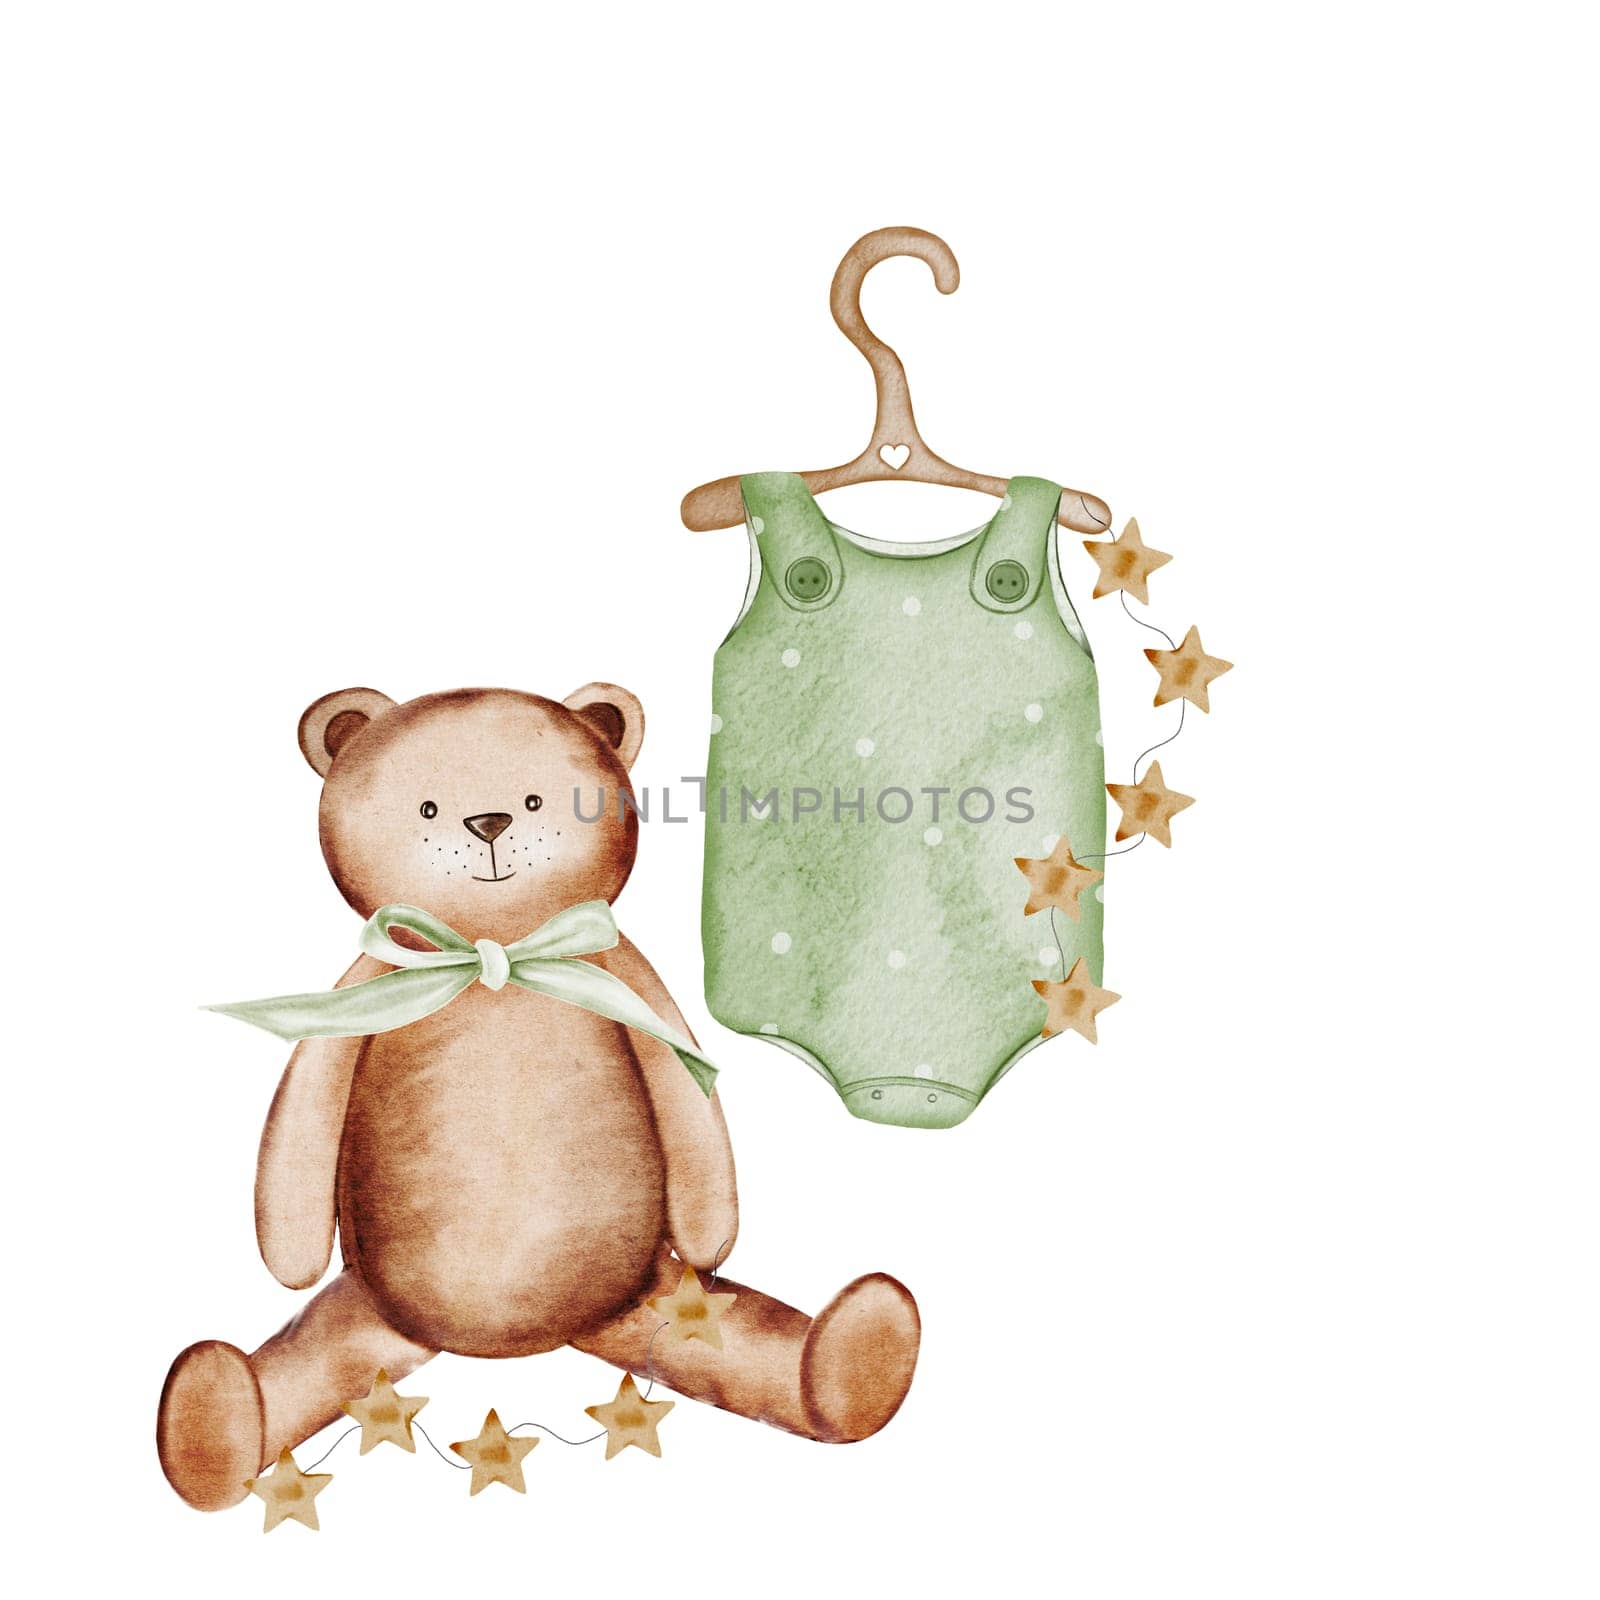 Baby clothes watercolor. Children's bodysuit and a teddy bear with a garland hand drawing isolated on white background. Clip art romper in pastel colors on a wooden hanger. For the design of children's cards and baby shower invitations. High quality illustration